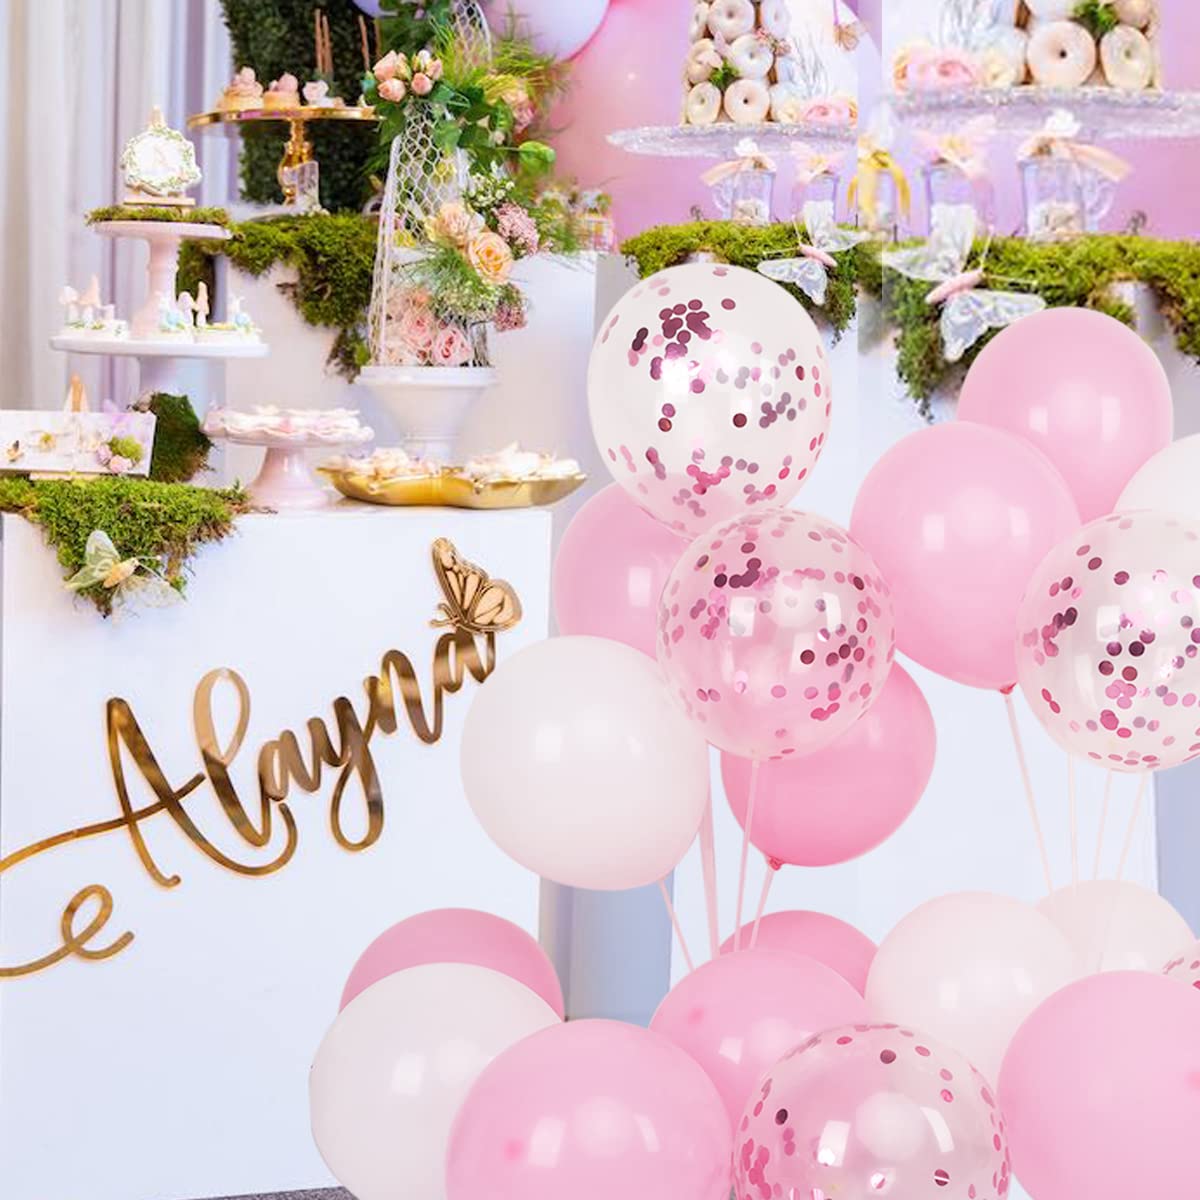 Pink Balloons Party Decorations, 50 Pcs 12 In Birthday Decorations, Happy Birthday Balloons with Pink Balloons and White Balloons